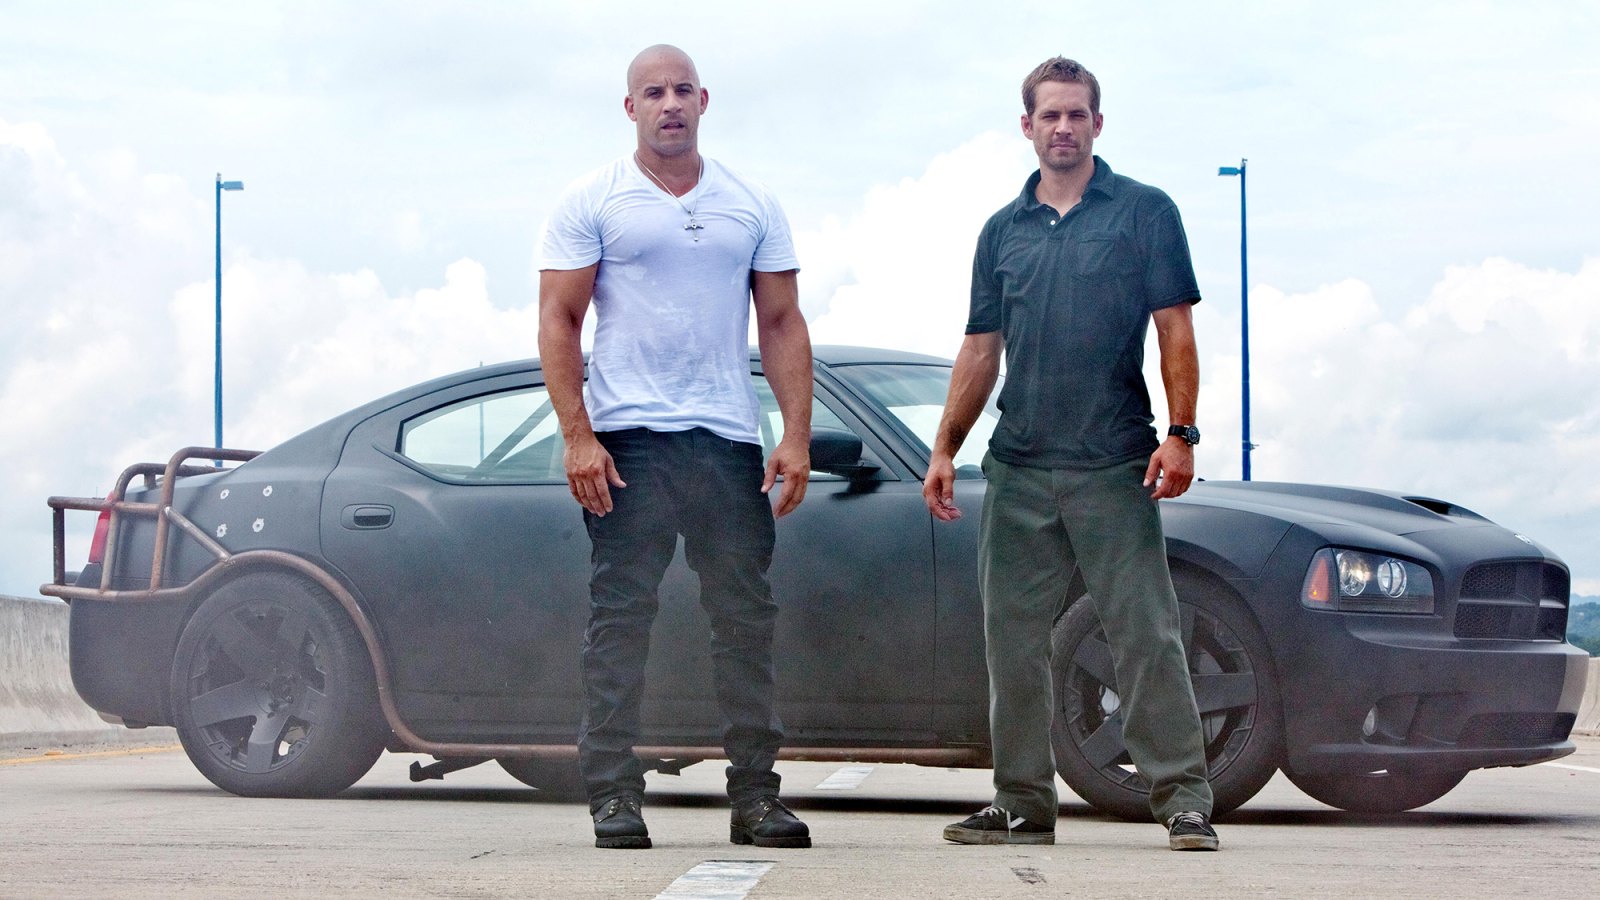 How To Watch All of the 'Fast & Furious' Movies in Order